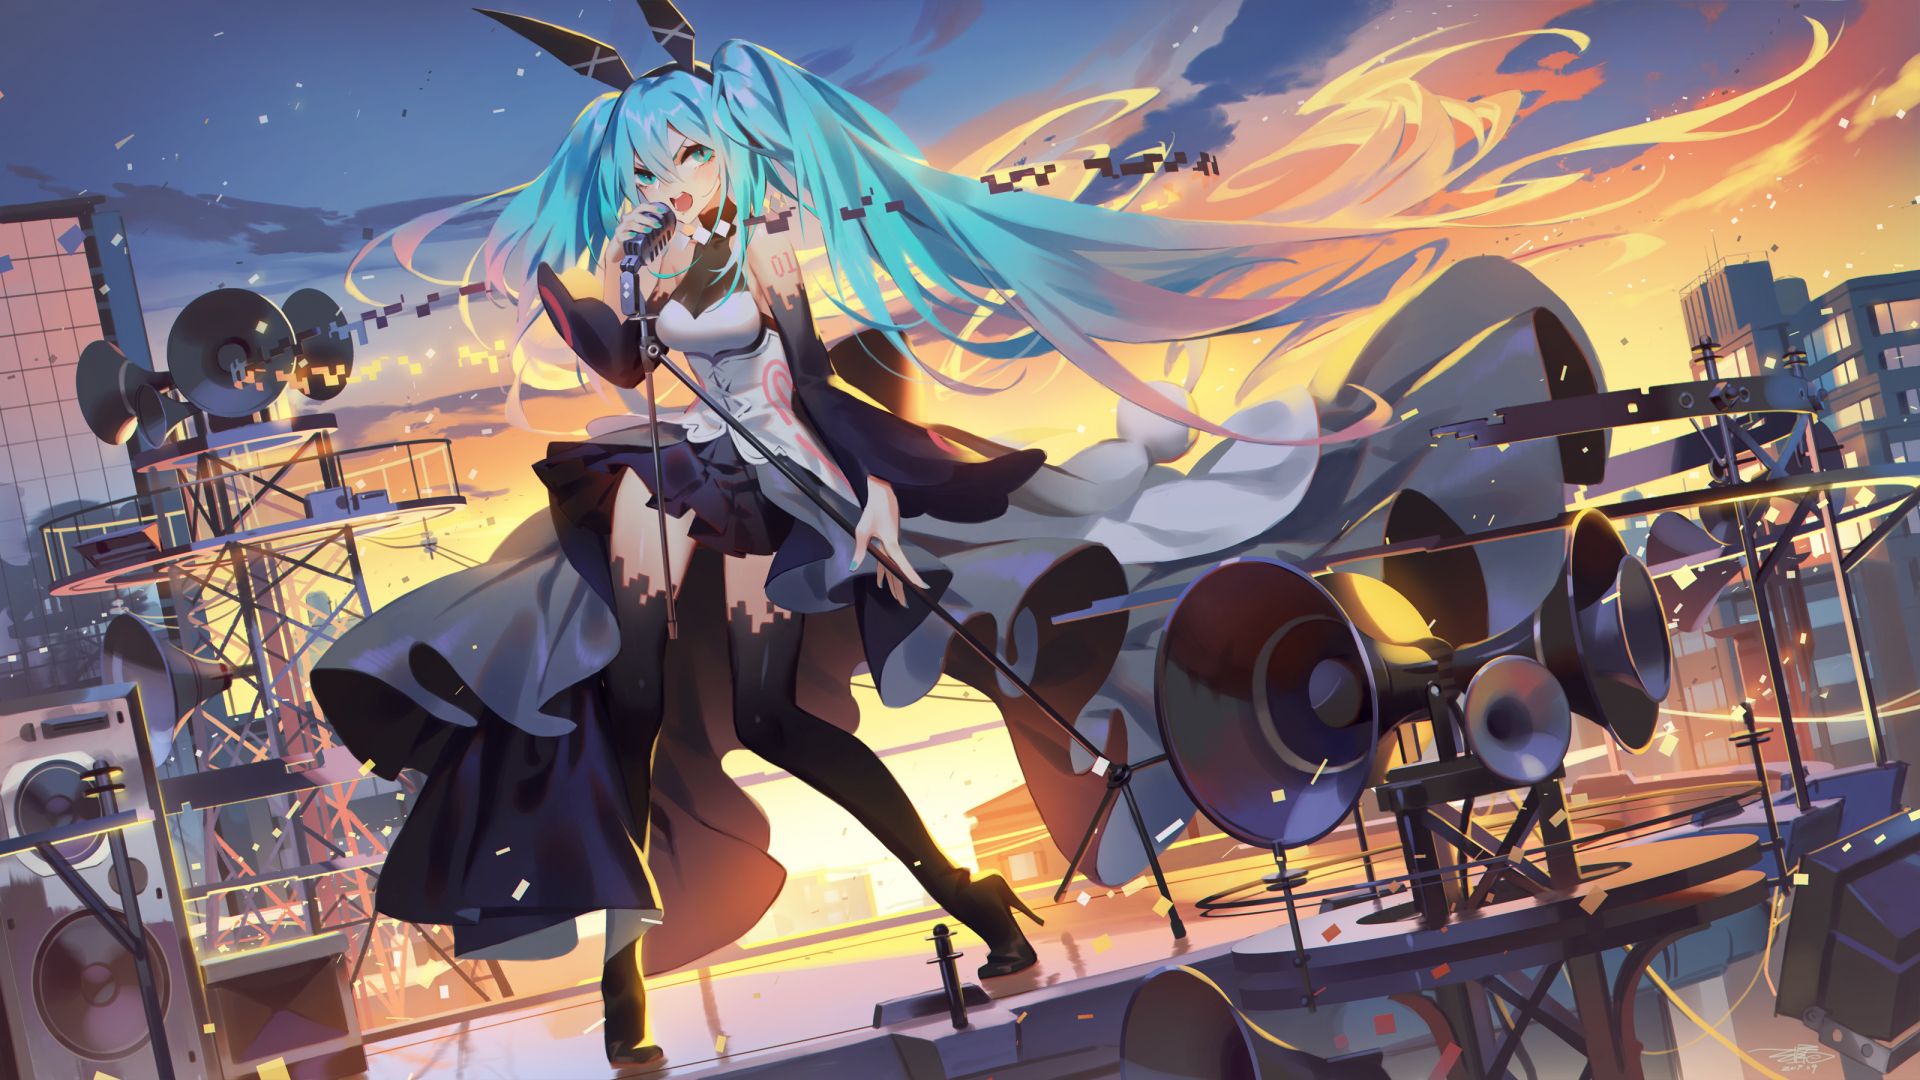 Desktop Wallpaper Hatsune Miku, A Humanoid, Anime Girl, Hd Image, Picture,  Background, A8912a